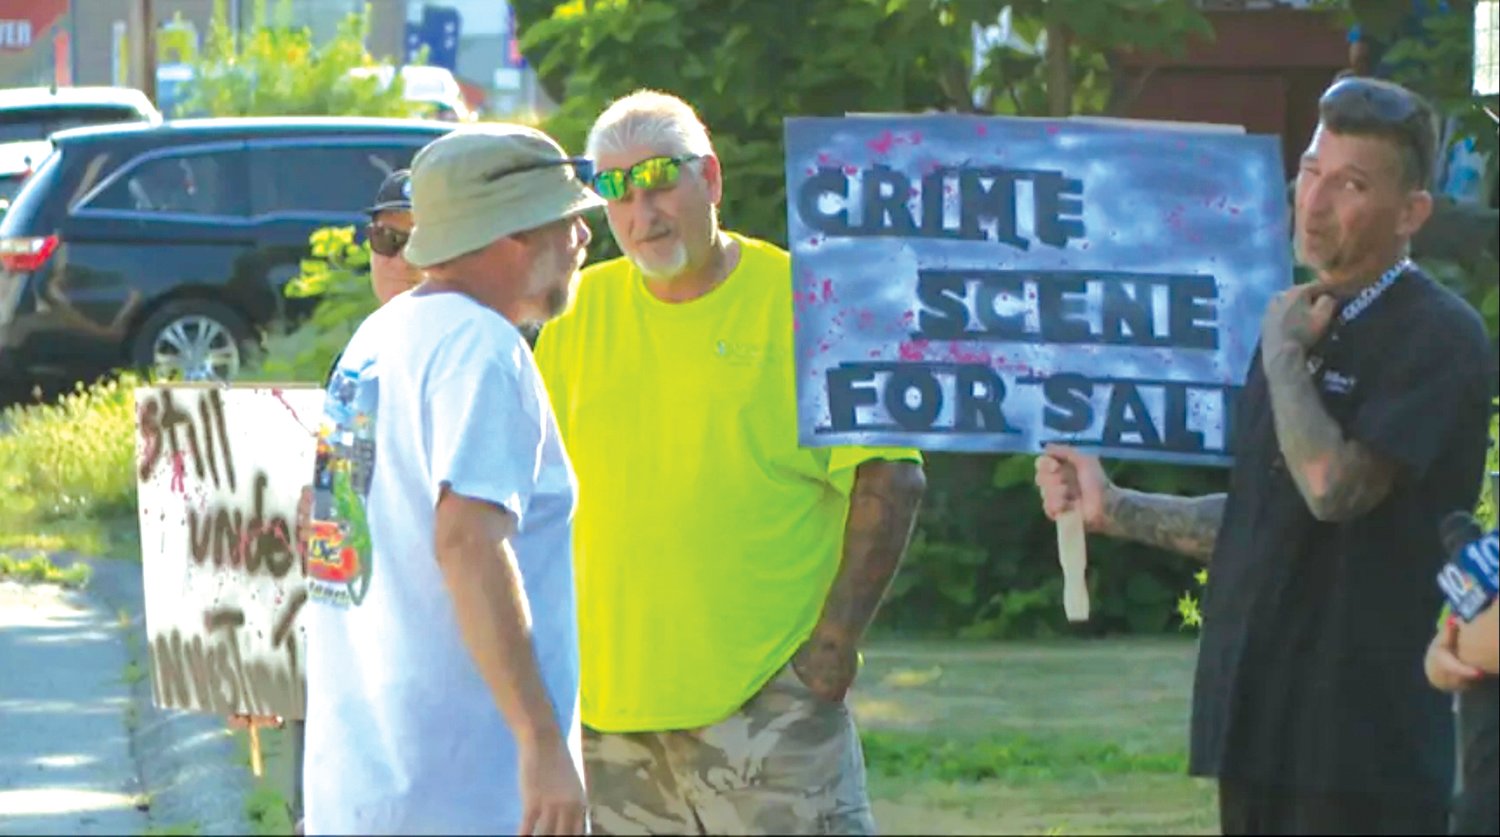 HE HAS A SIGN TOO: David Viens is the father of Dillon Viens, 16, a Johnston resident and student at who died following a “shooting” at 78 Cedar St. The home is now for sale, and David picketed a recent Open House. He carried signs reading: “CRIME SCENE FOR SALE” and “Open Investigation for SALE,” and wanted to ensure potential buyers knew what happened in the house. (Submitted photos)